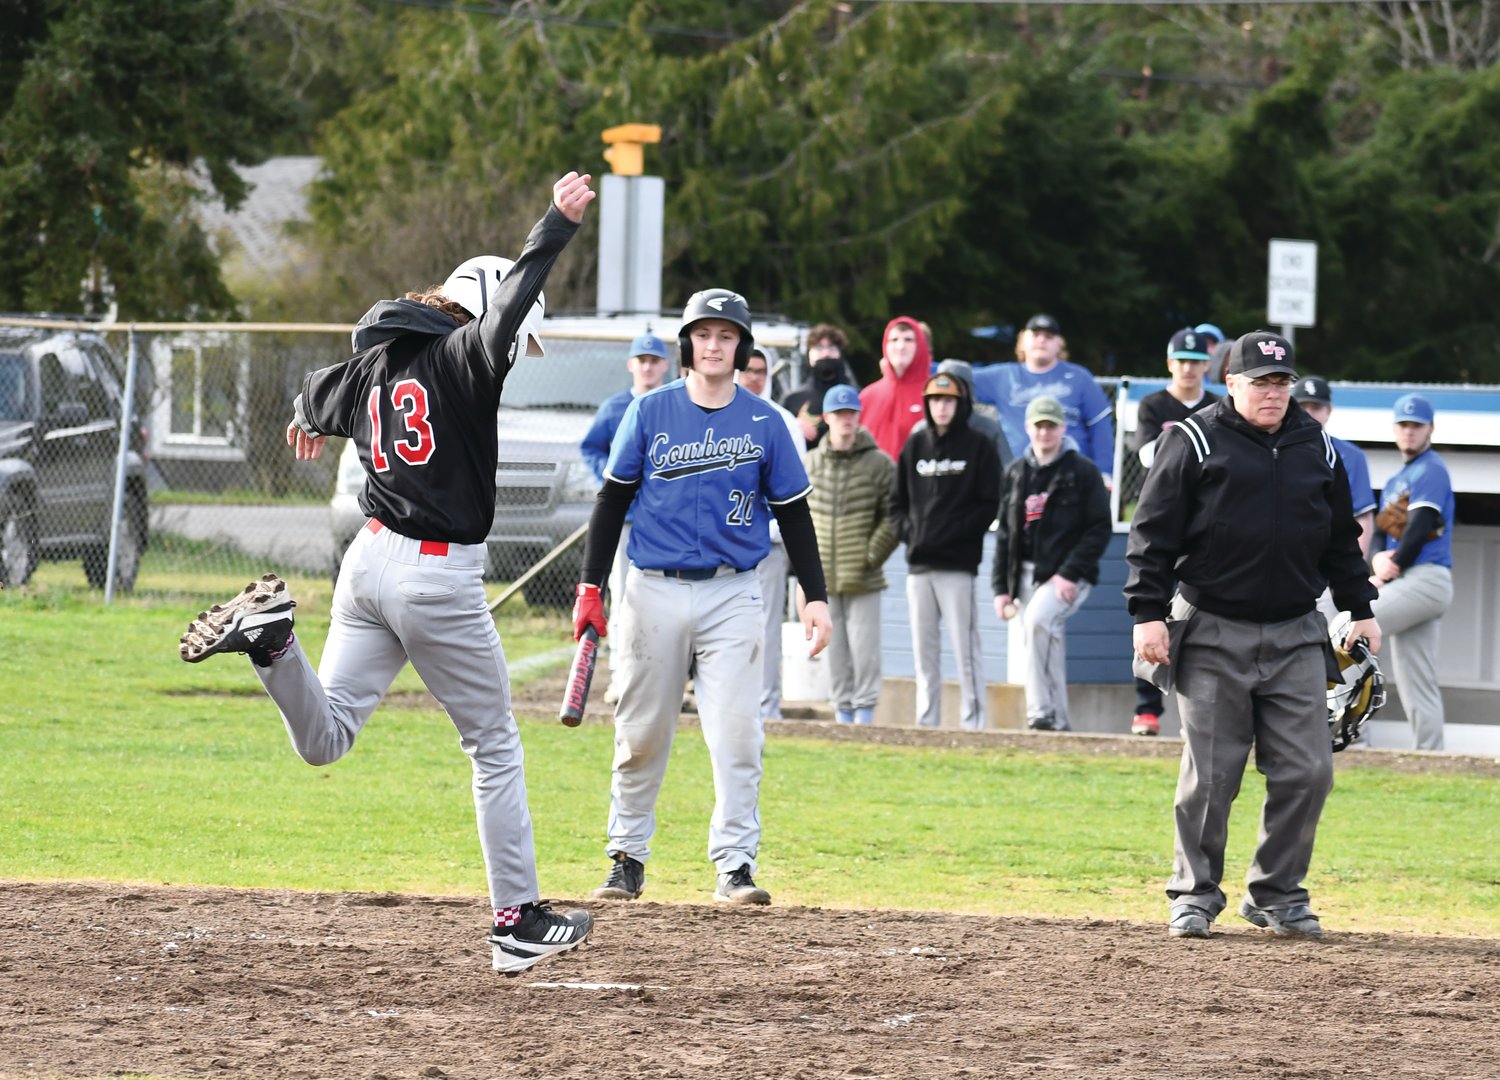 EJ’s Nathan Nisbet steps on home plate to score a run in the fifth inning. Teammate Sean Jones watches, proceeding to congratulate Nisbet shortly after.